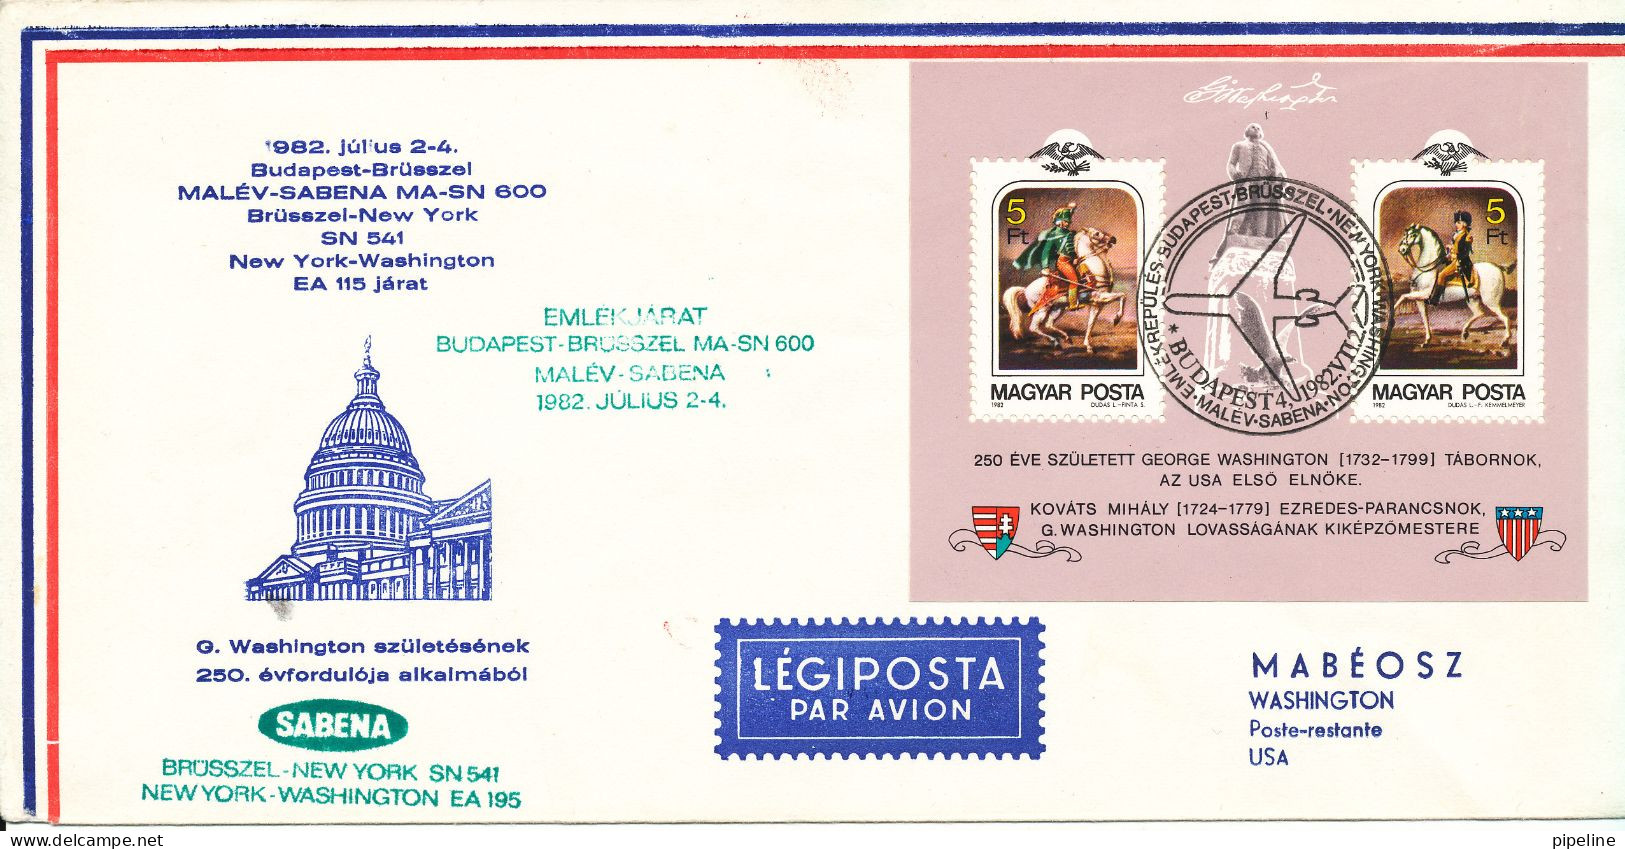 Hungary Air Mail Cover Special Flight Malev Sabena Budapest- Bruxelles - New York - Washington 2-7-1982 With Cachet - Storia Postale